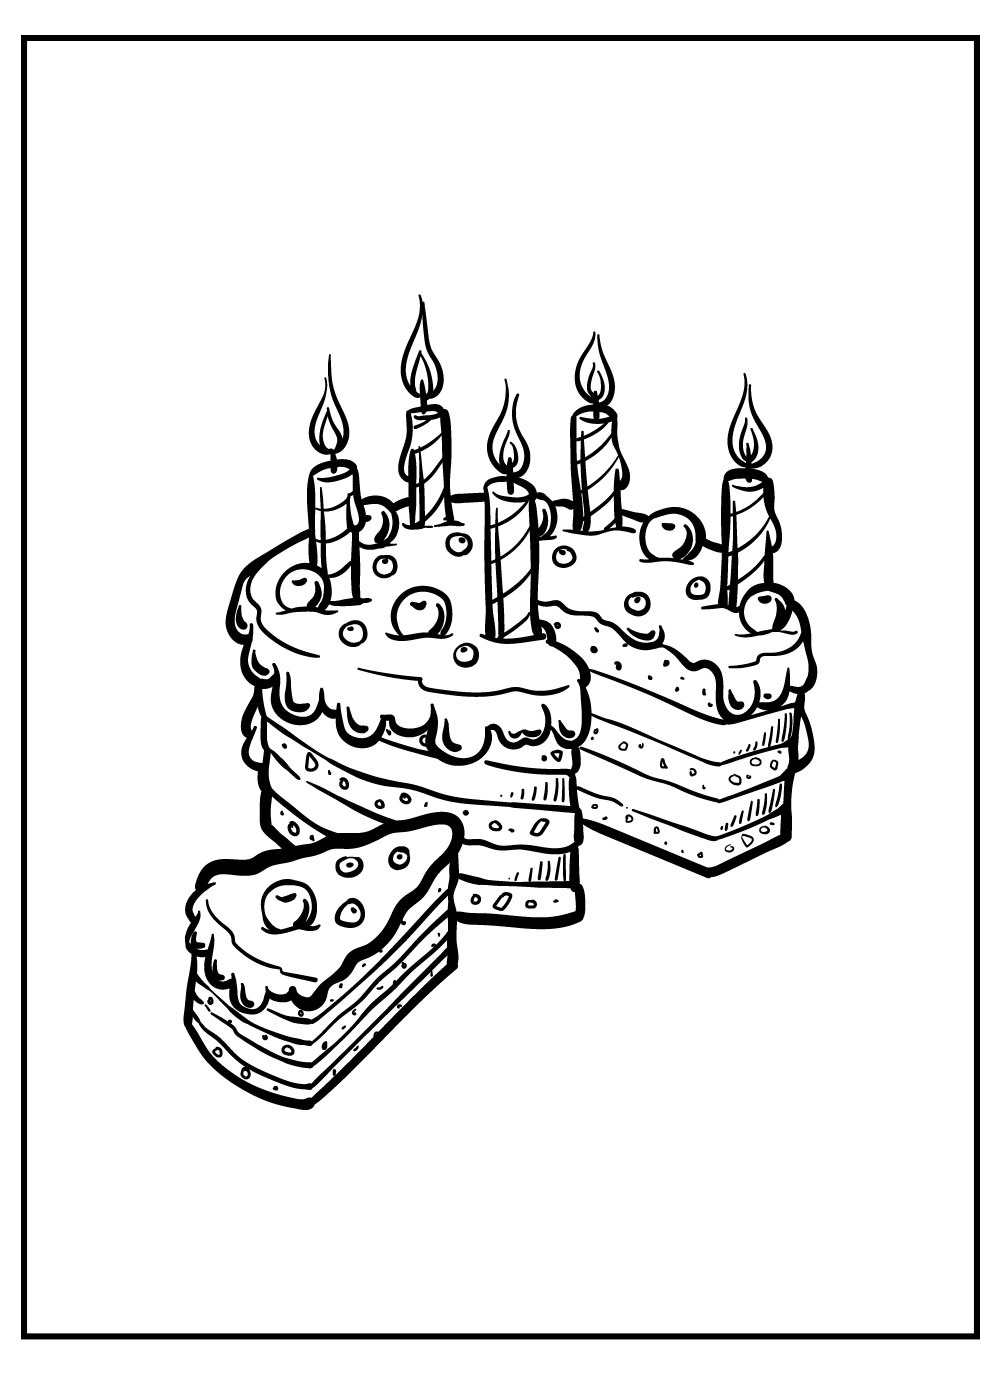 Piece For Birthday Cake Coloring Page